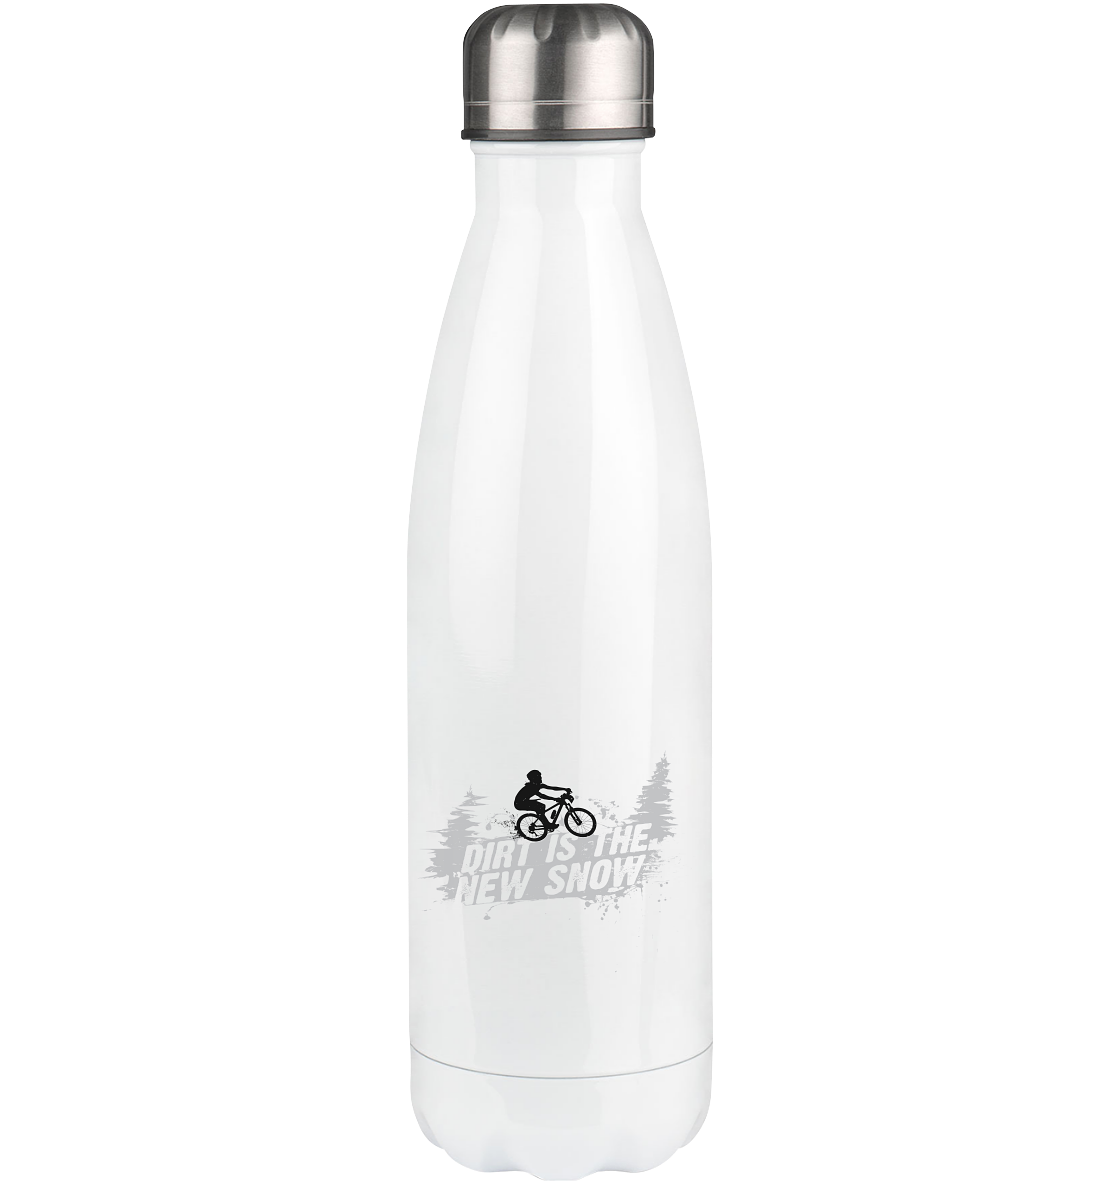 Dirt is the new Snow - Edelstahl Thermosflasche mountainbike 500ml